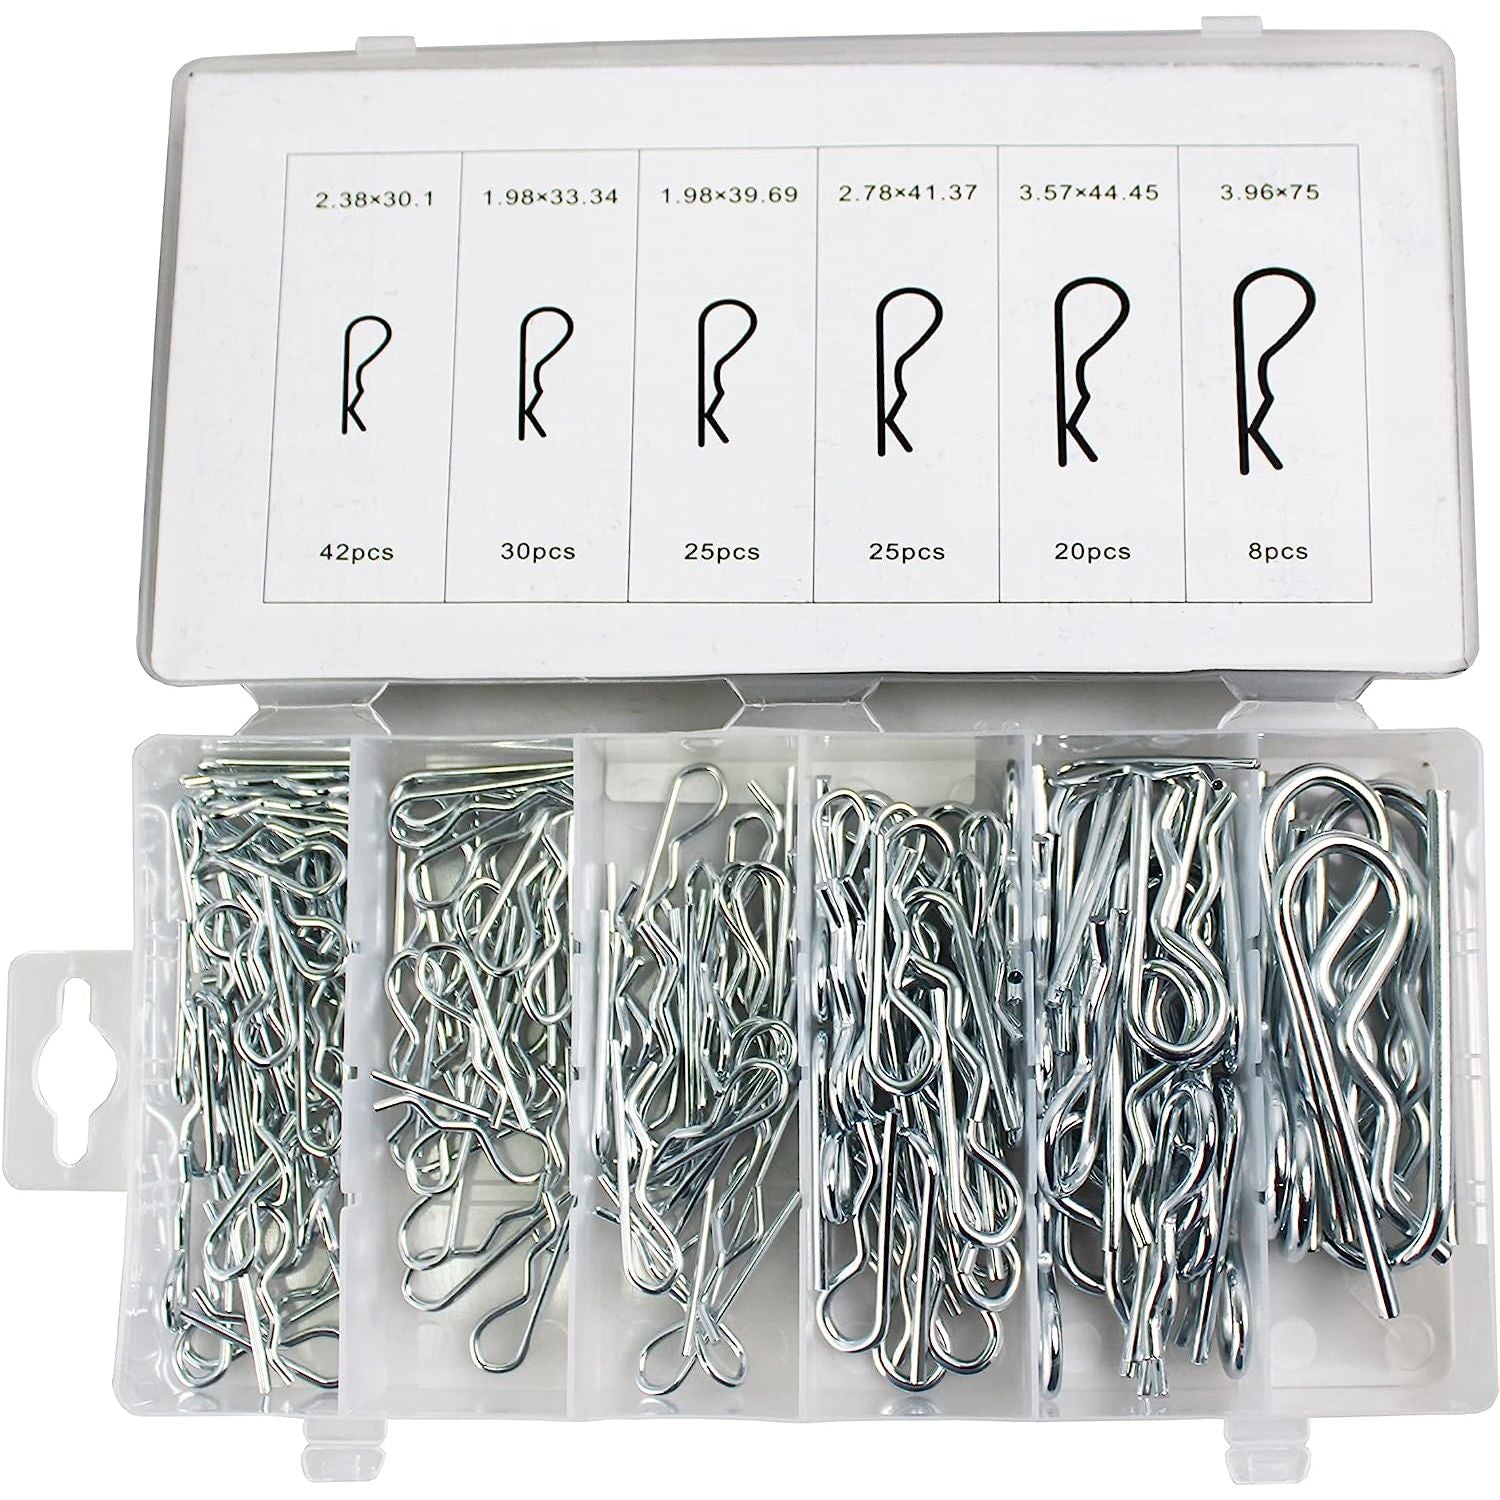 150 Piece Cotter Pin Hairpin Hitch Pin Assortment Kit - South East Clearance Centre